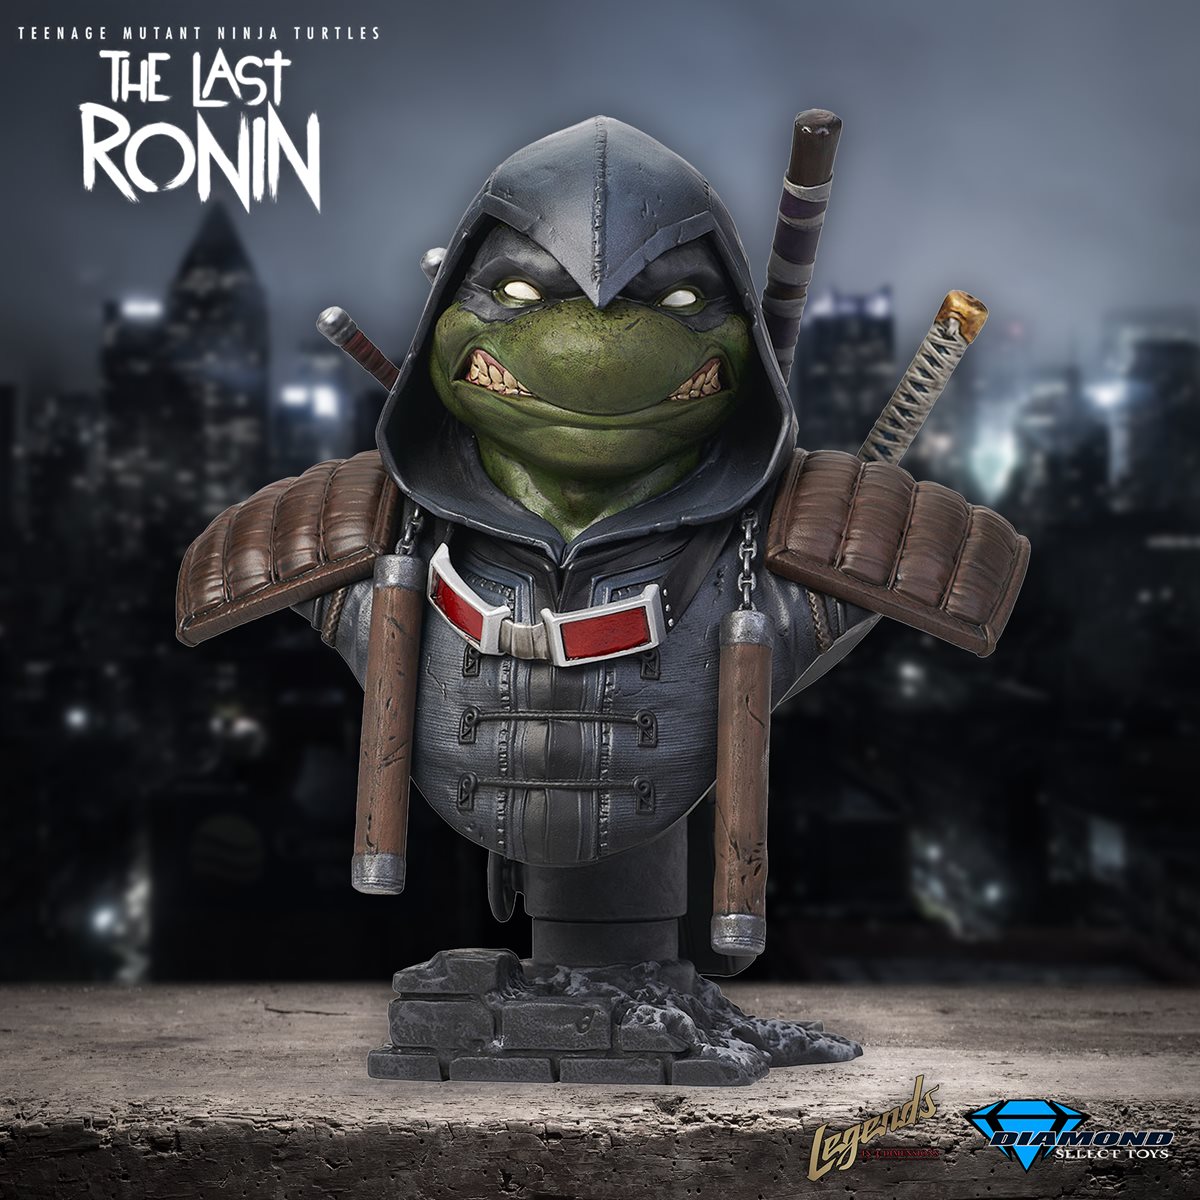 Last Ronin Legends in 3-Dimensions Bust